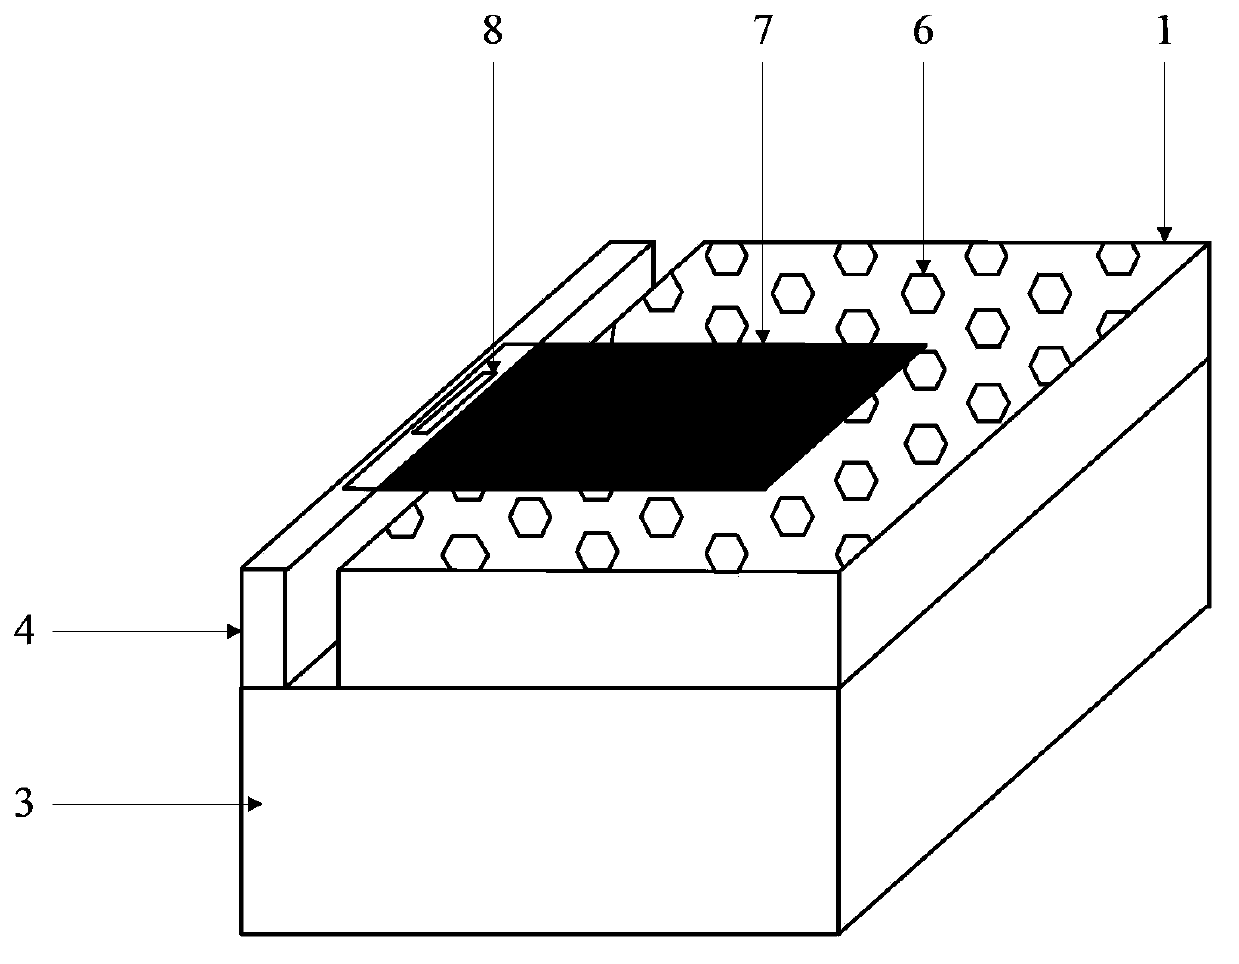 IC removing device